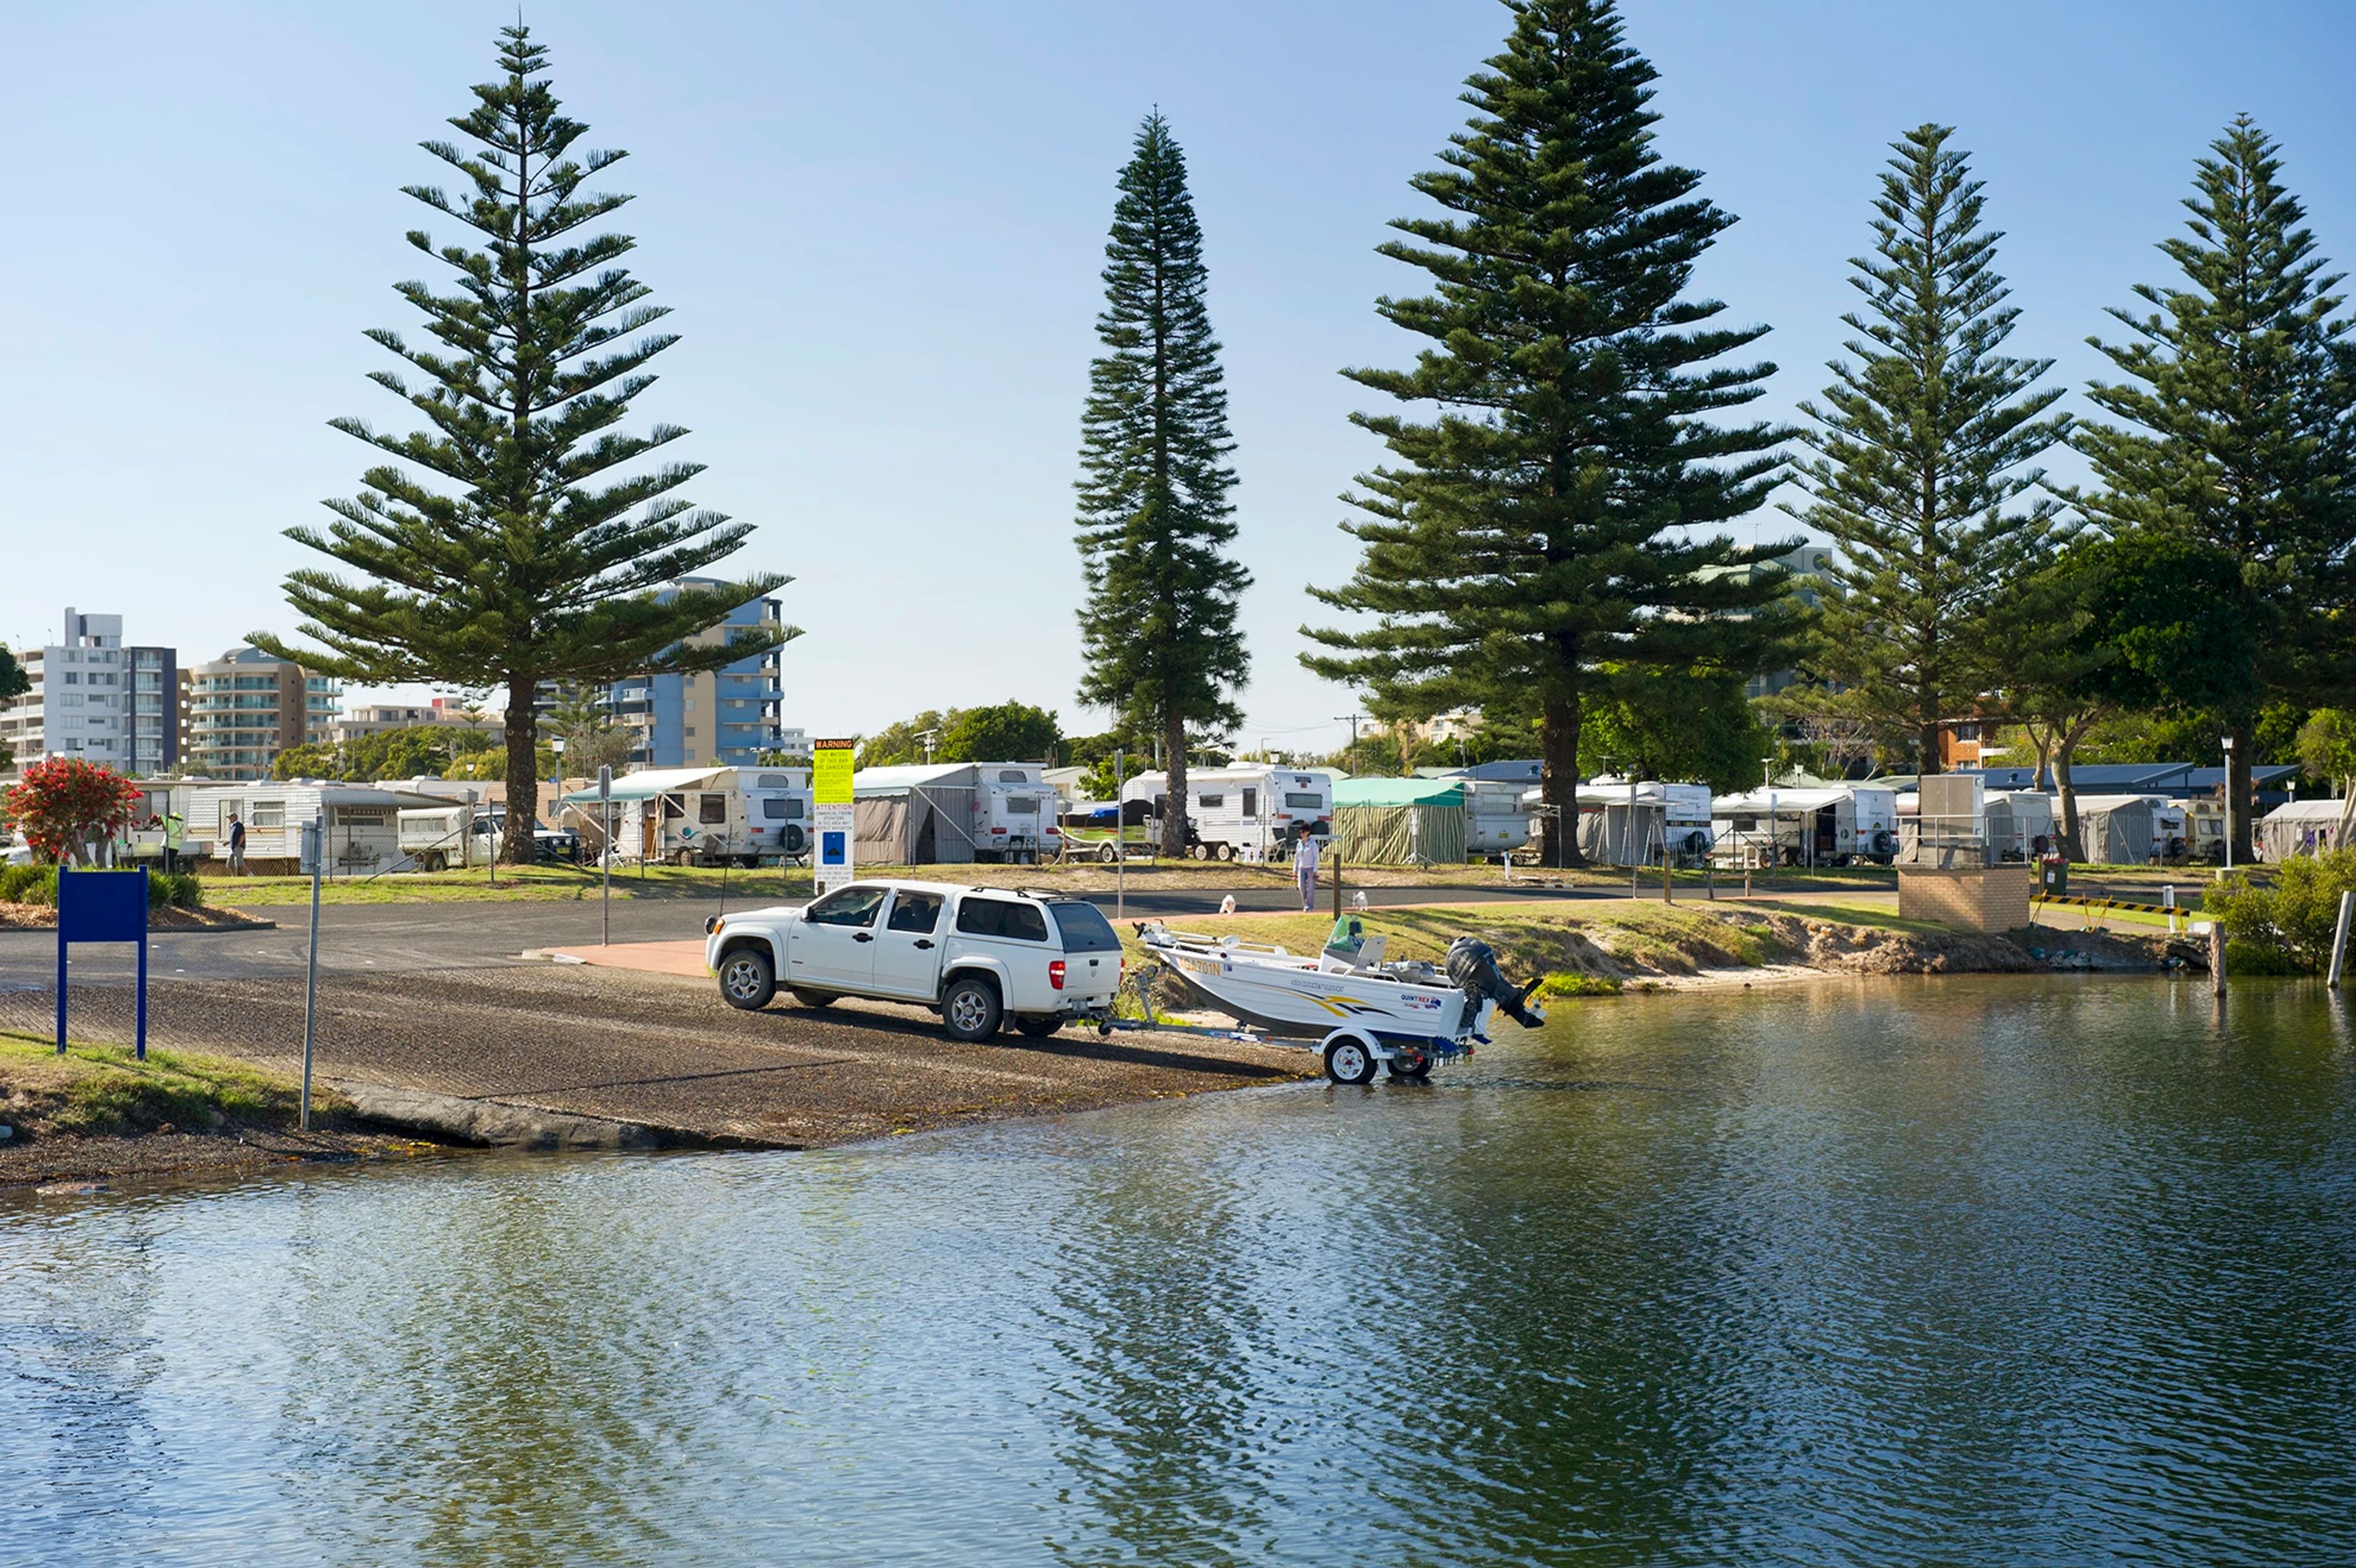 Forster Beach boat launch